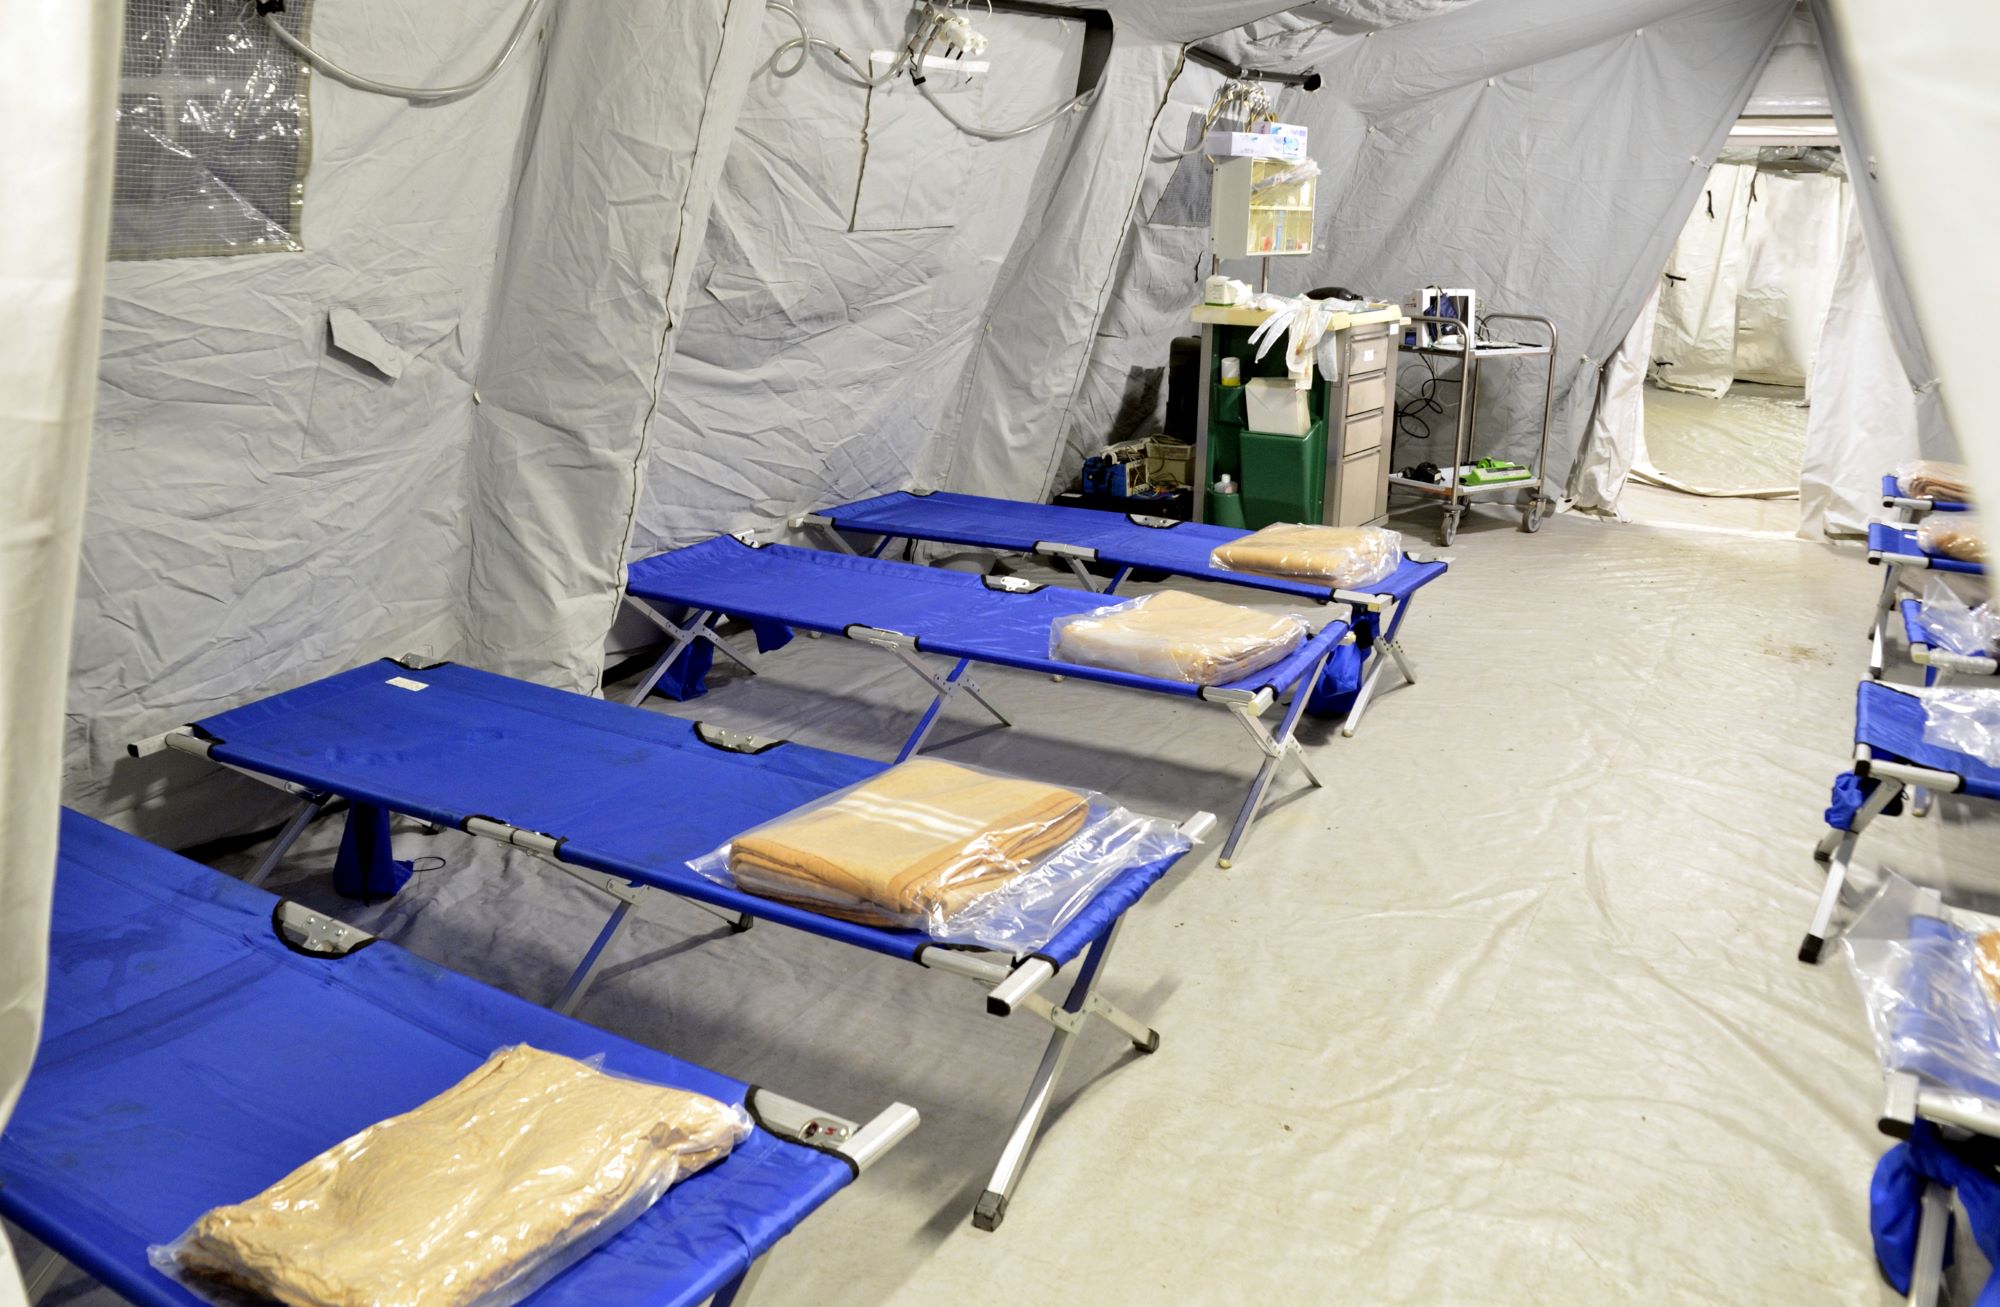 How Healthcare Professionals Benefit From Field Hospitals